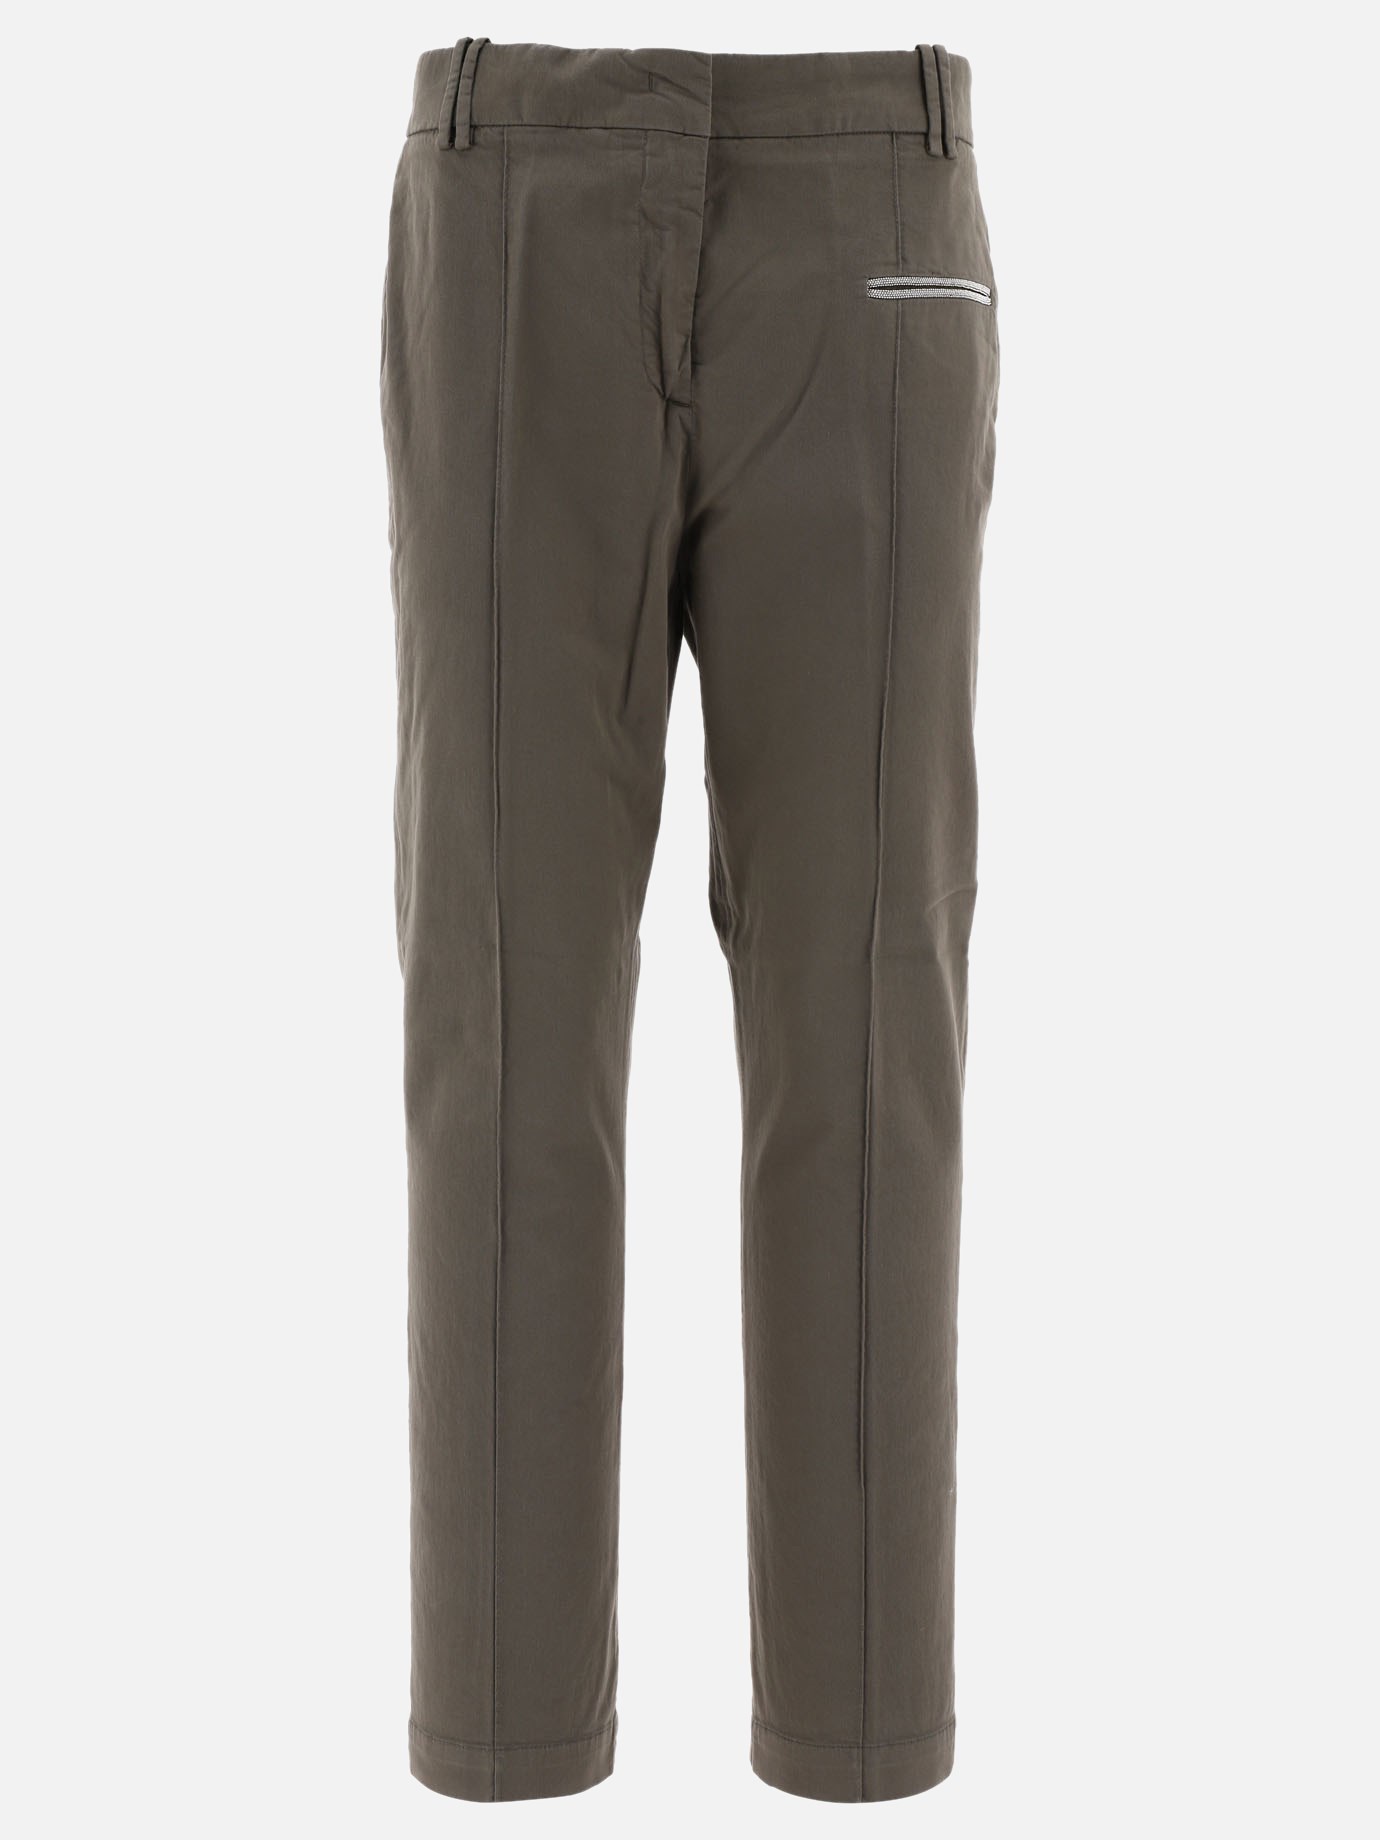 Trousers featuring double welt pocket